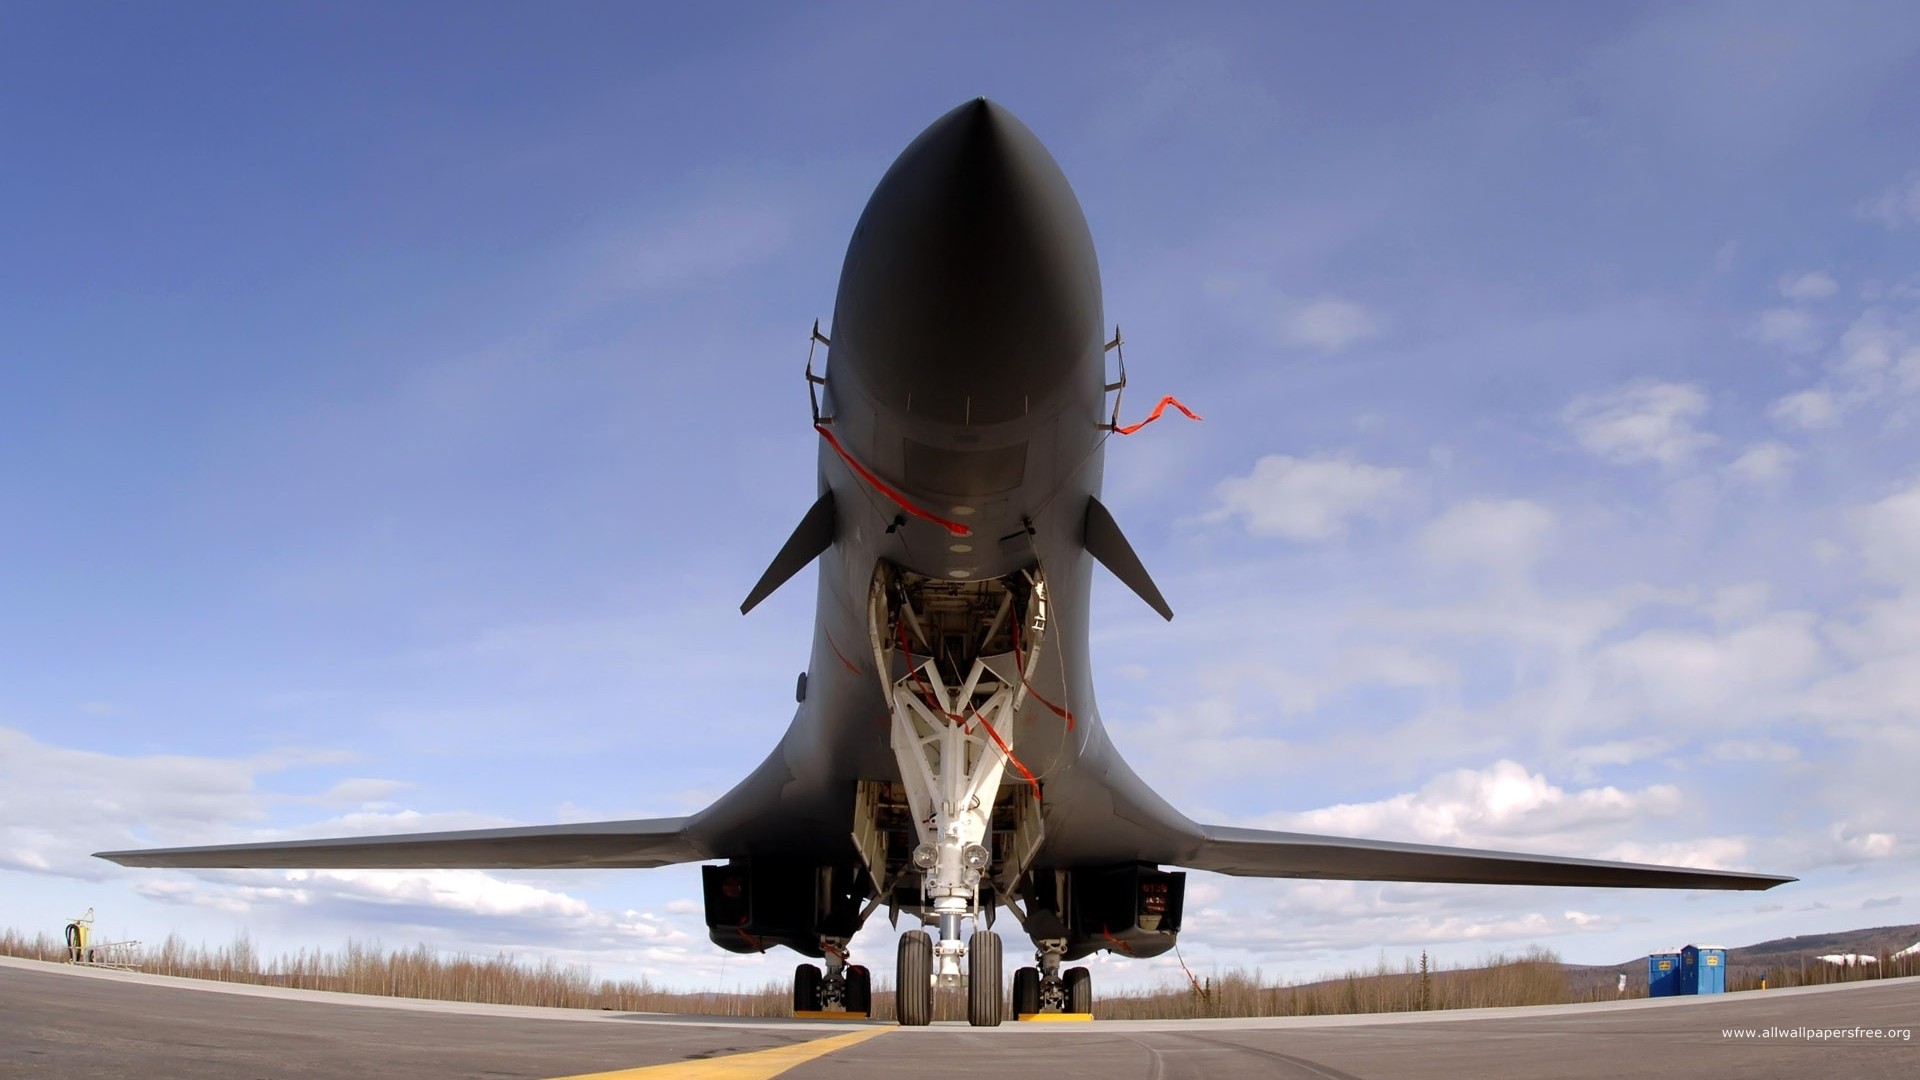 General 1920x1080 military aircraft airplane jets Rockwell B-1 Lancer aircraft military low-angle frontal view American aircraft